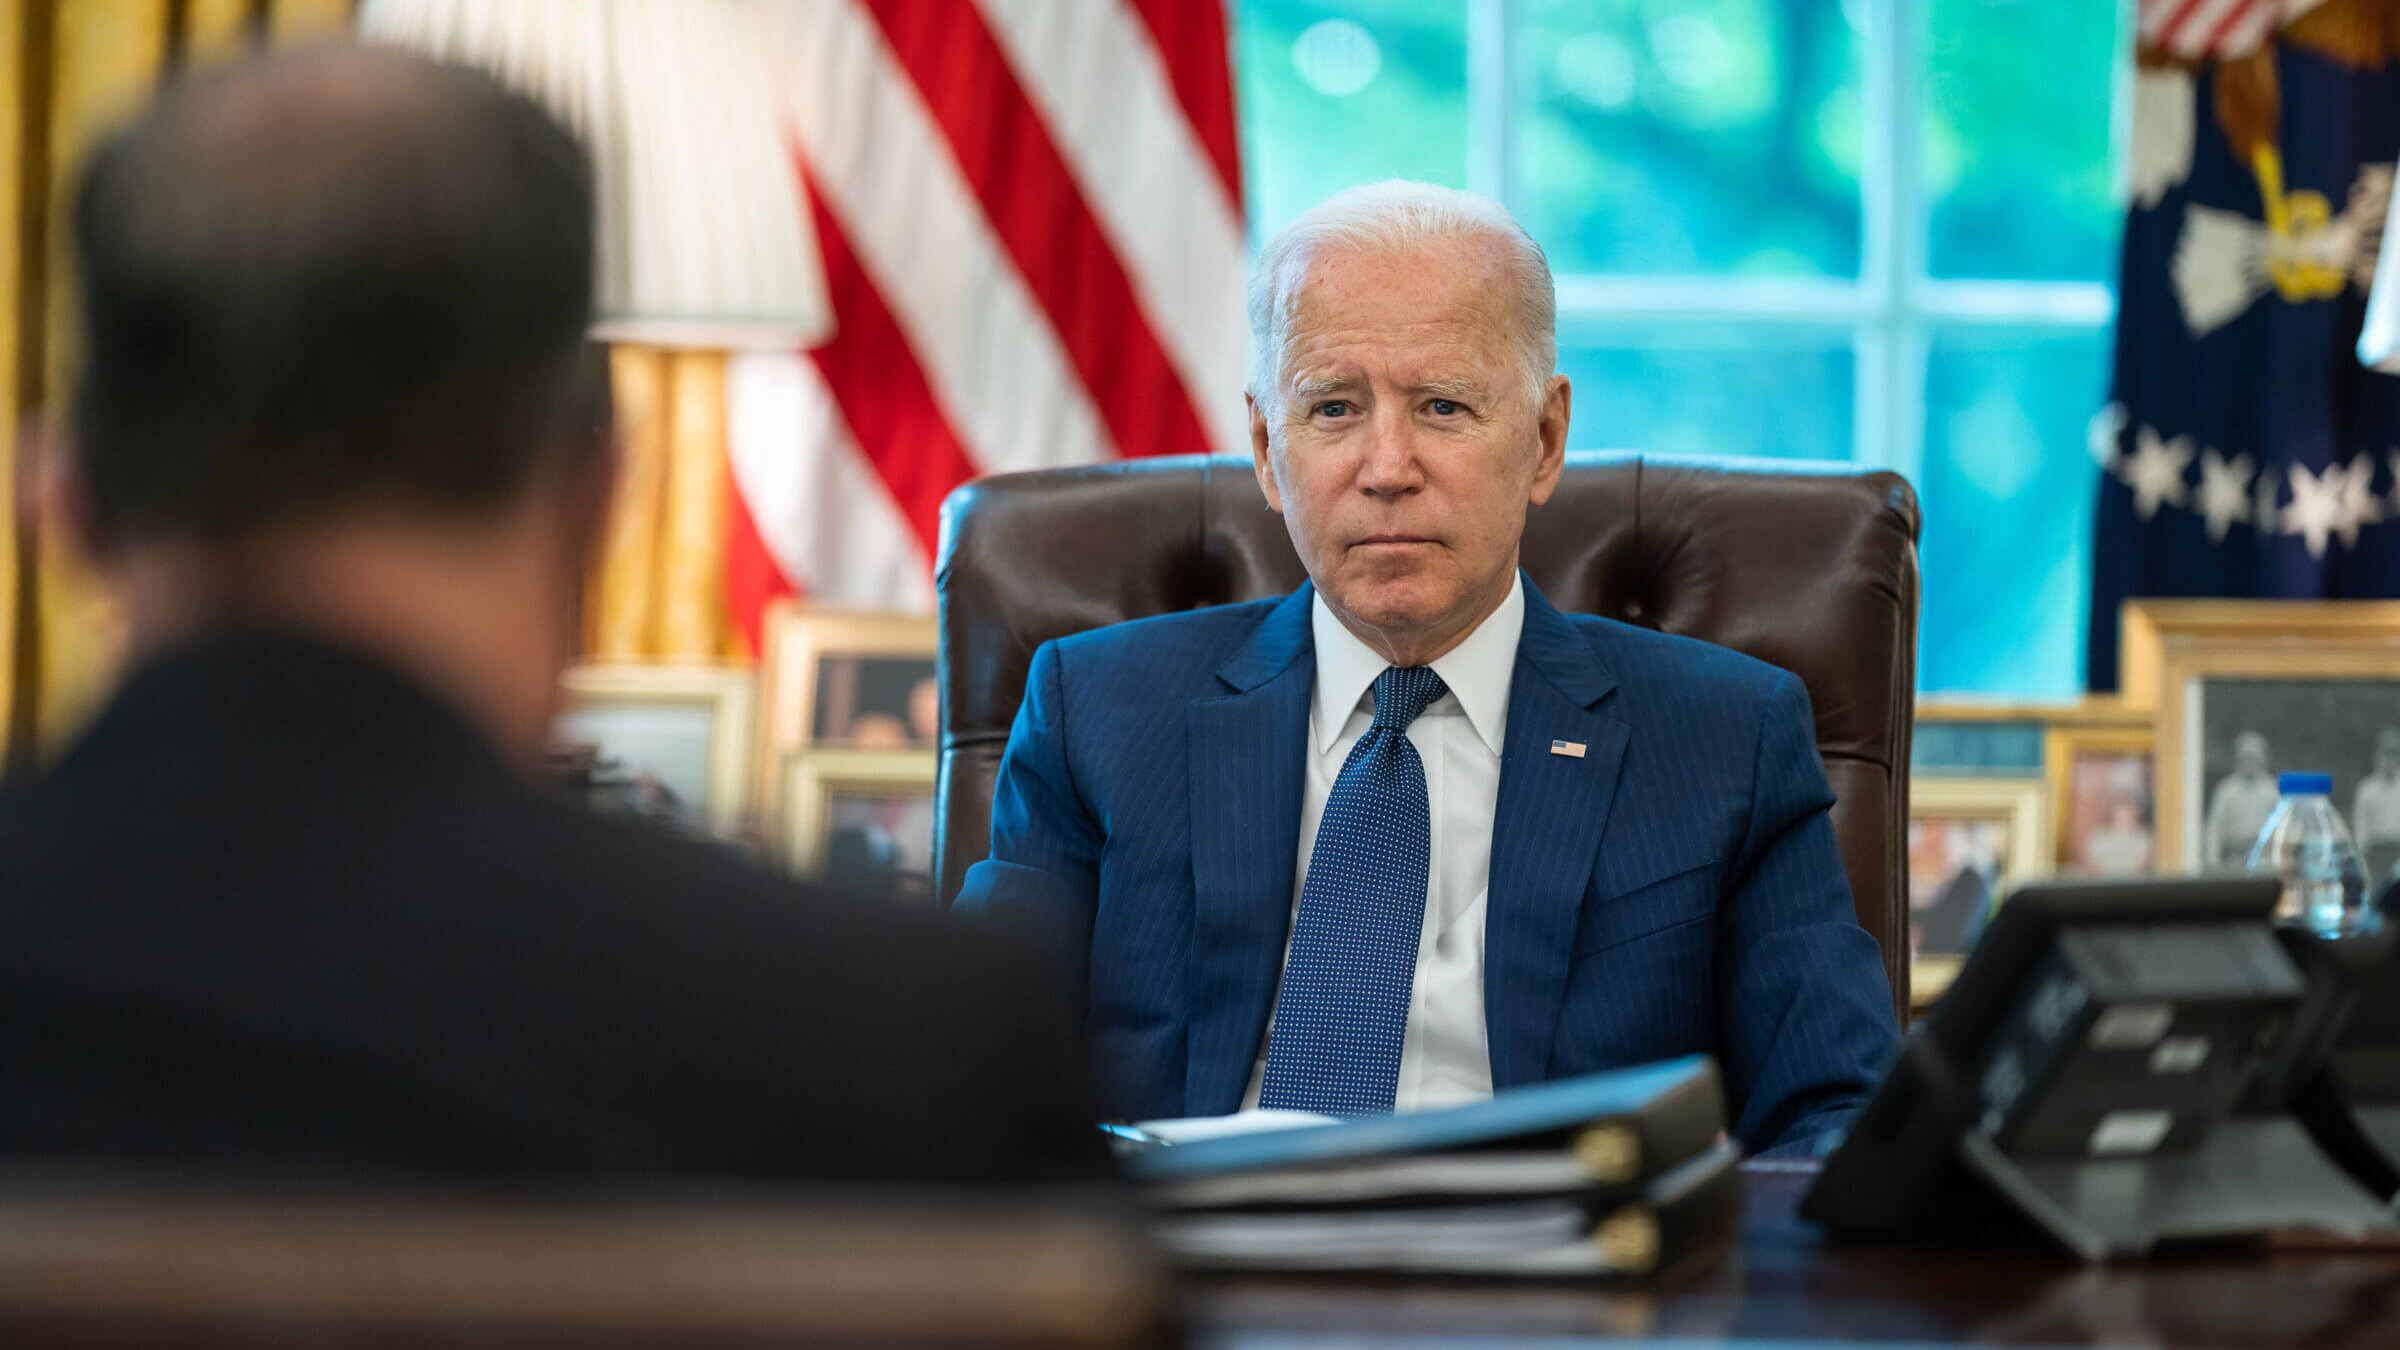 President Joe Biden meets with White House staff in the Oval Office, Thursday, Aug. 26, 2021, to prepare for a meeting with Israeli Prime Minister Naftali Bennett on August 26, 2021. 